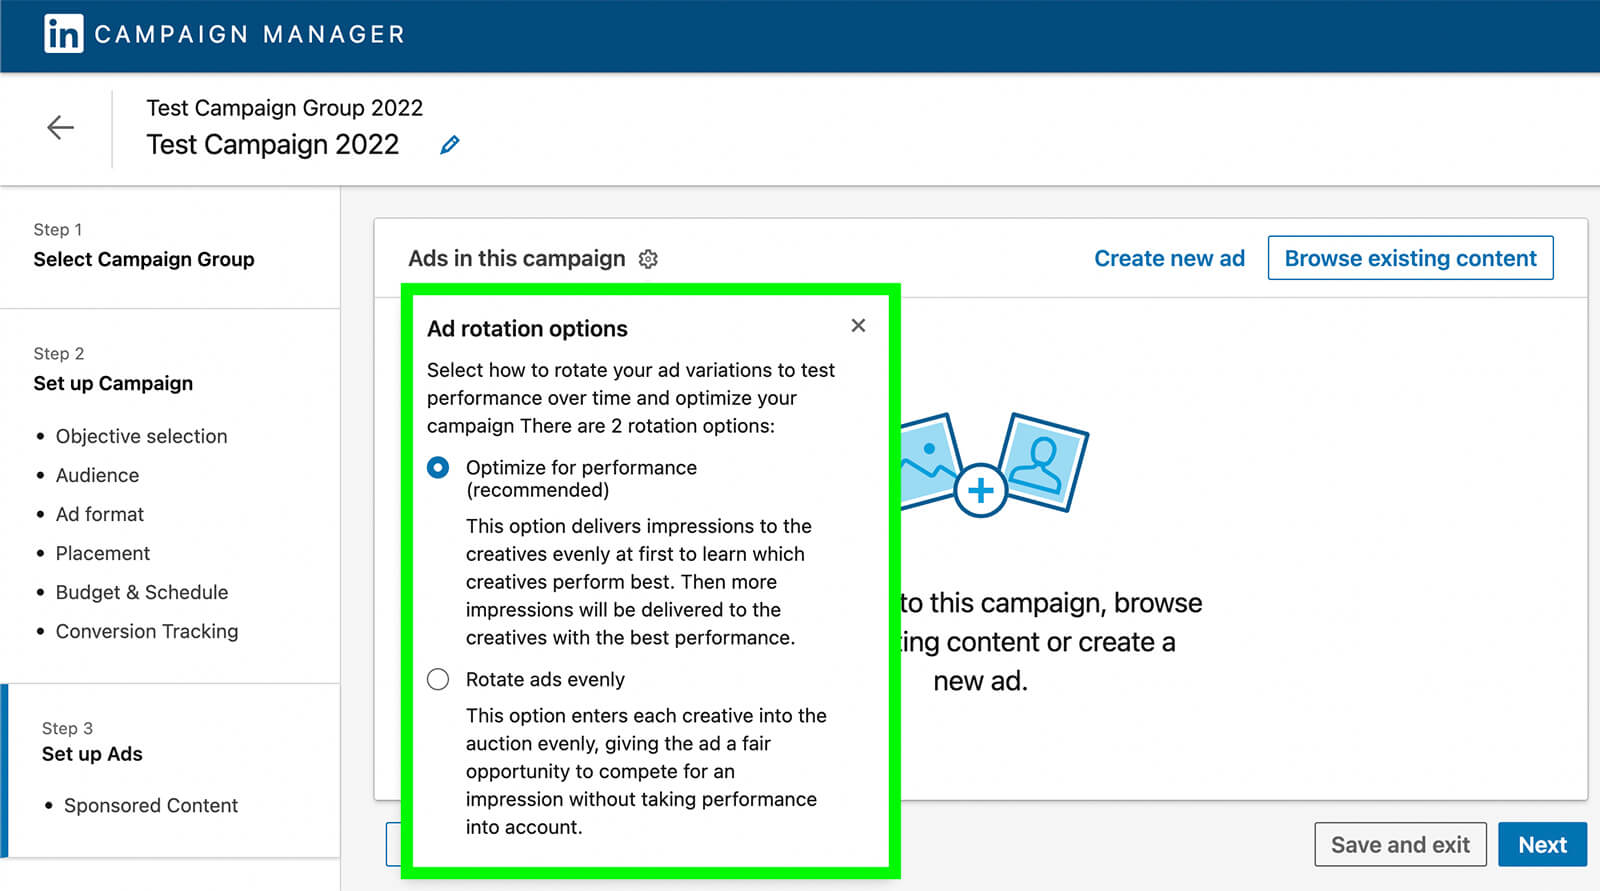 how-to-experiment-with-linkedin-ad-creatives-campaign-manager-optimize-for-performance-rotate-ads-evenly-example-1